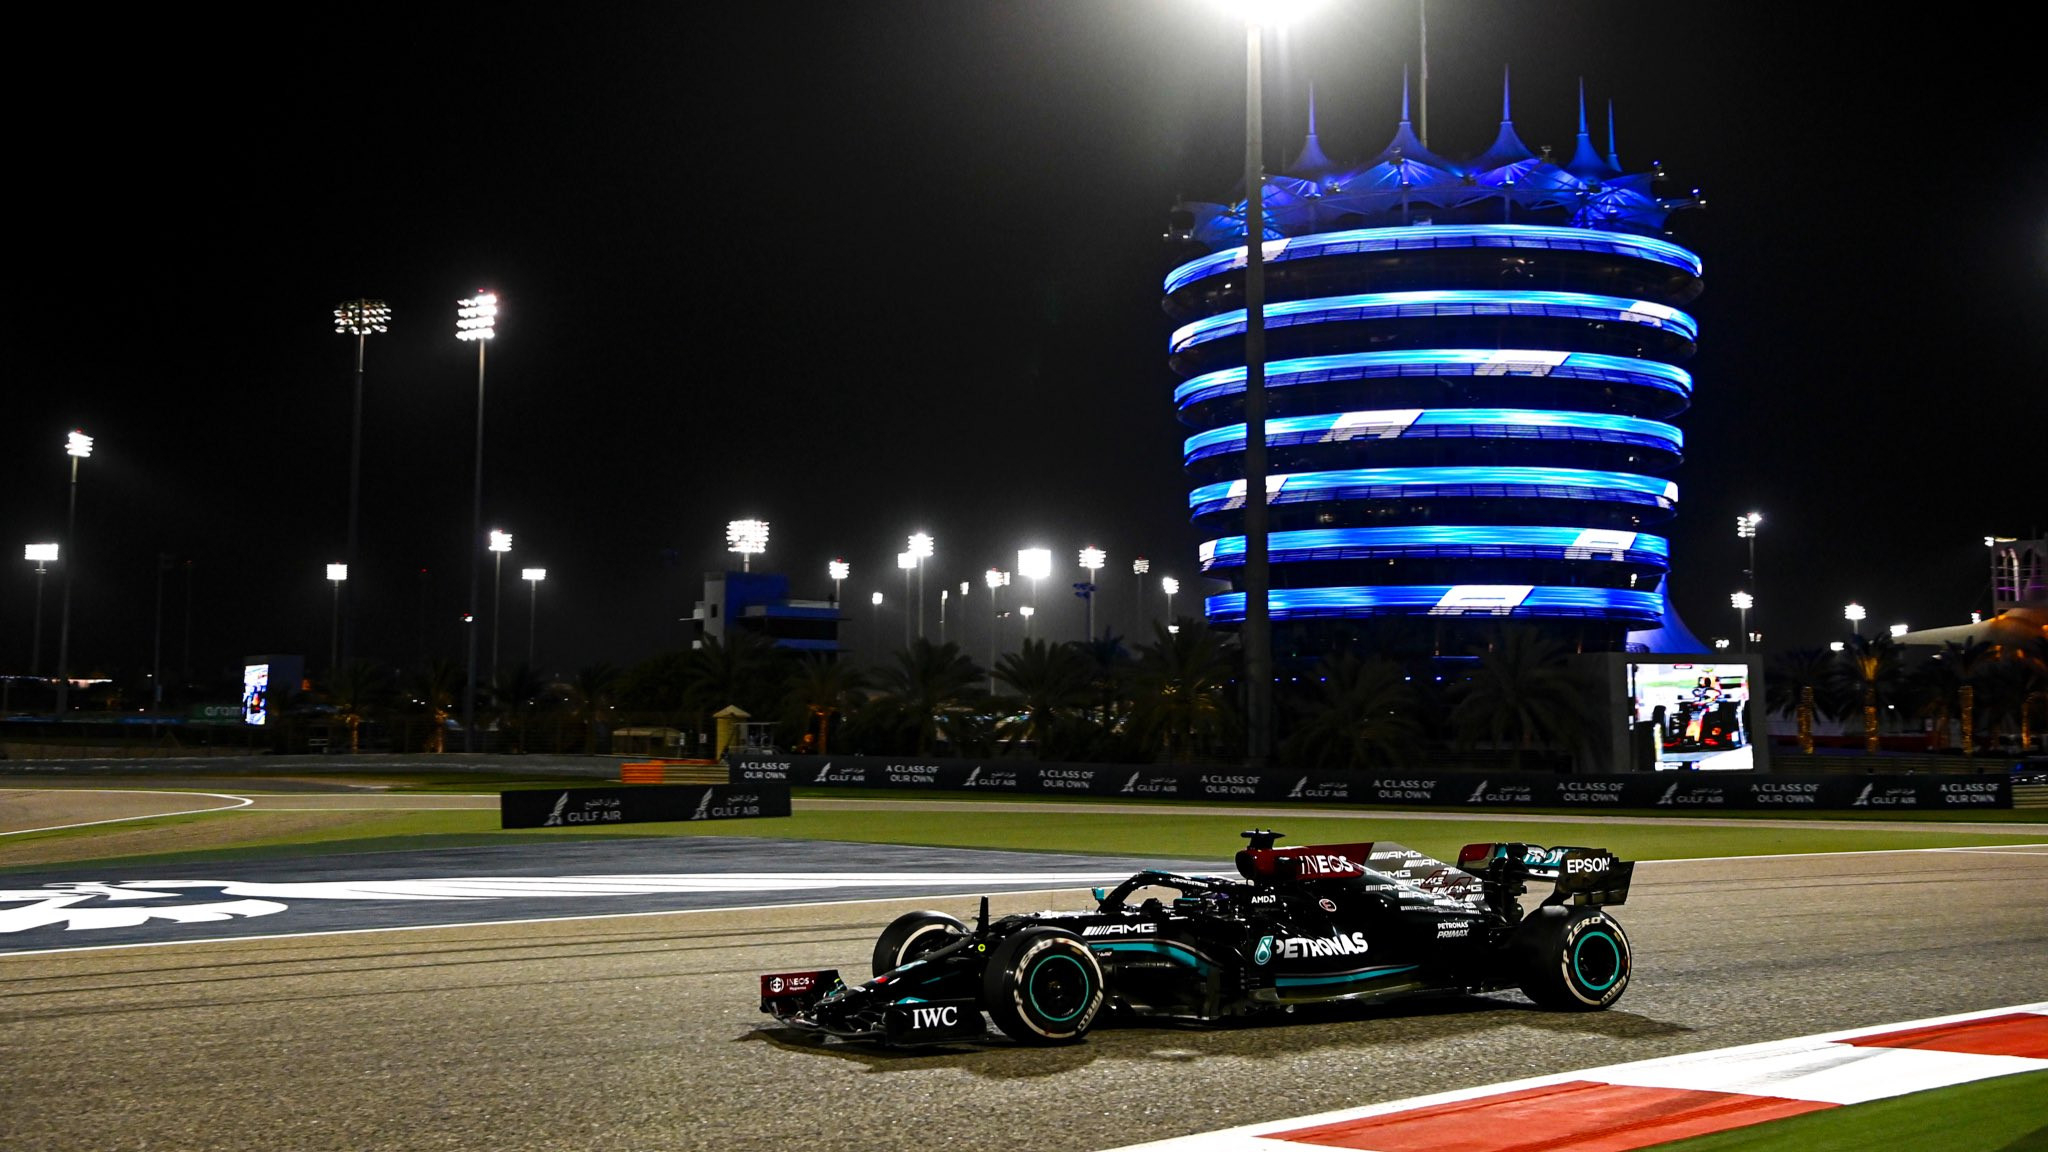 F1 To Test And Start 2022 Season In Bahrain | Grandpx.news-When Will F1 2022 Calendar Be Confirmed